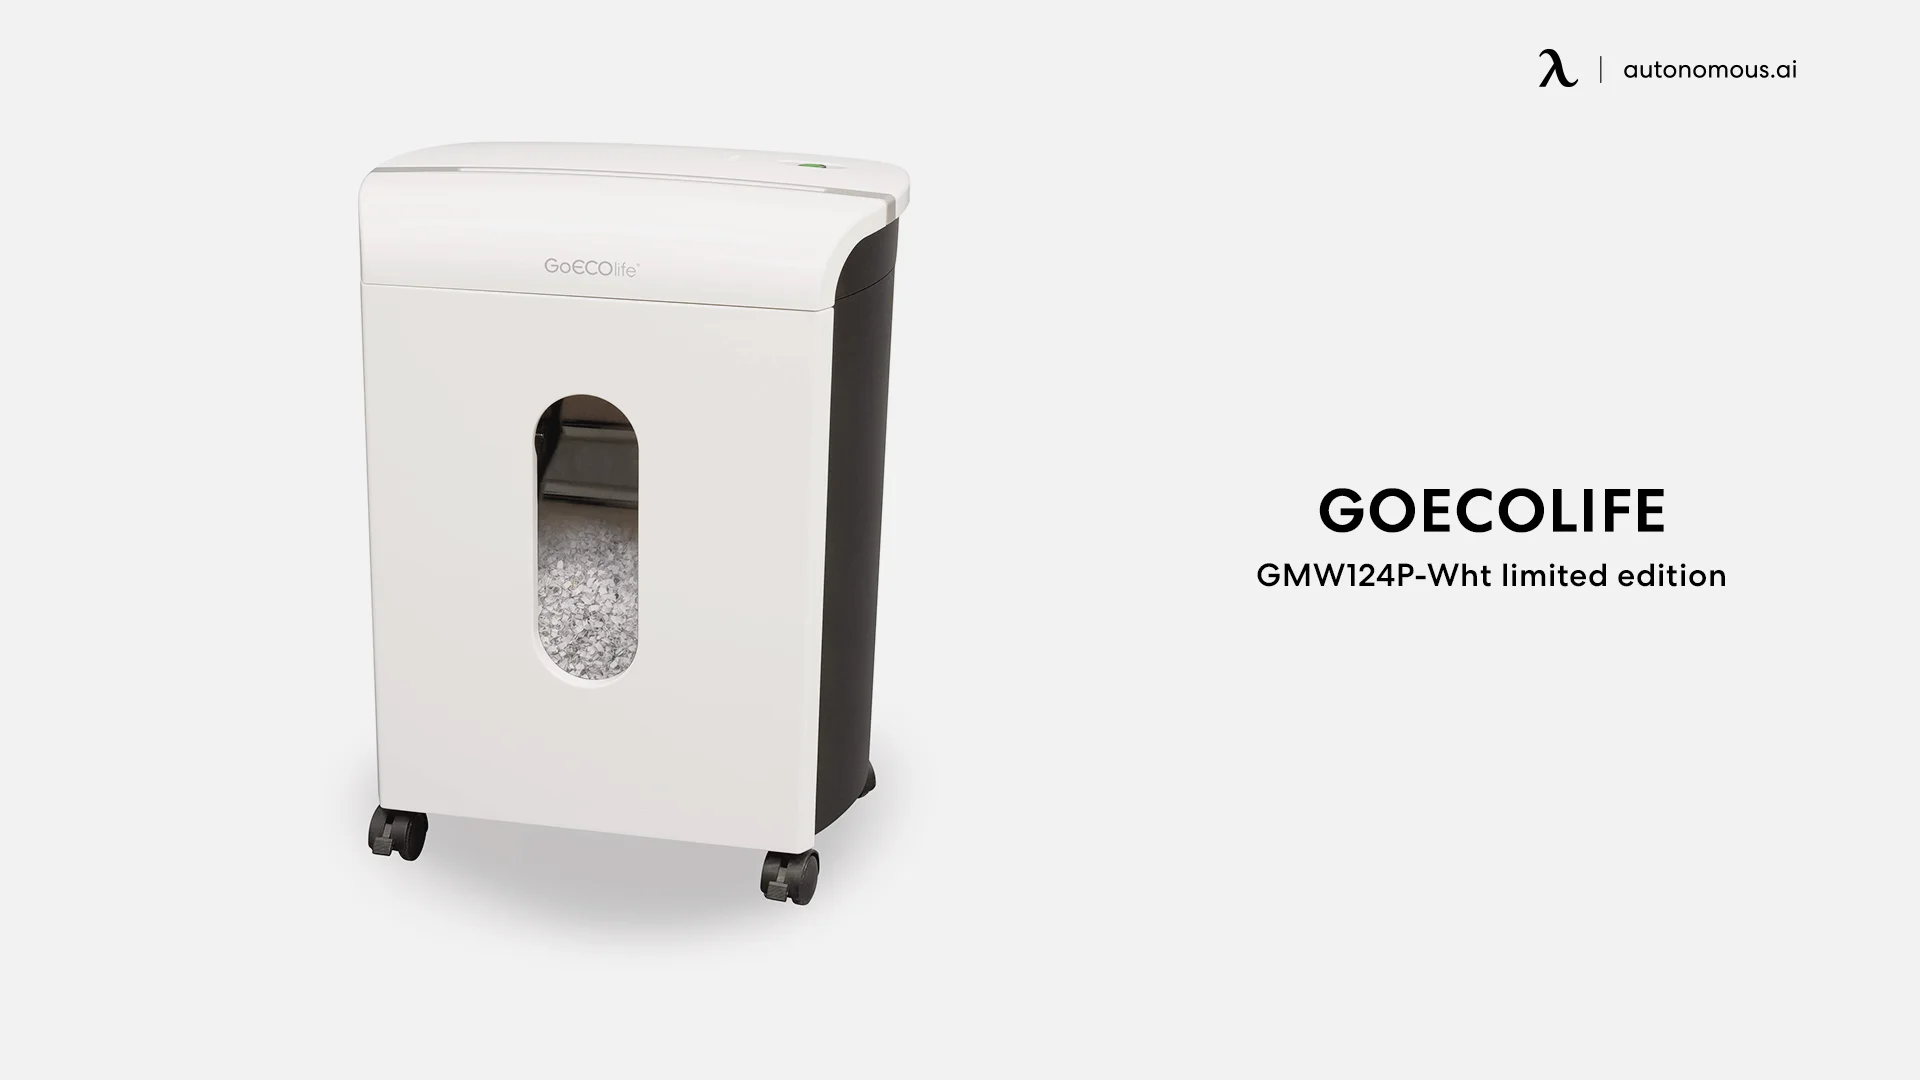 GoECOlife GMW124P-Wht limited edition